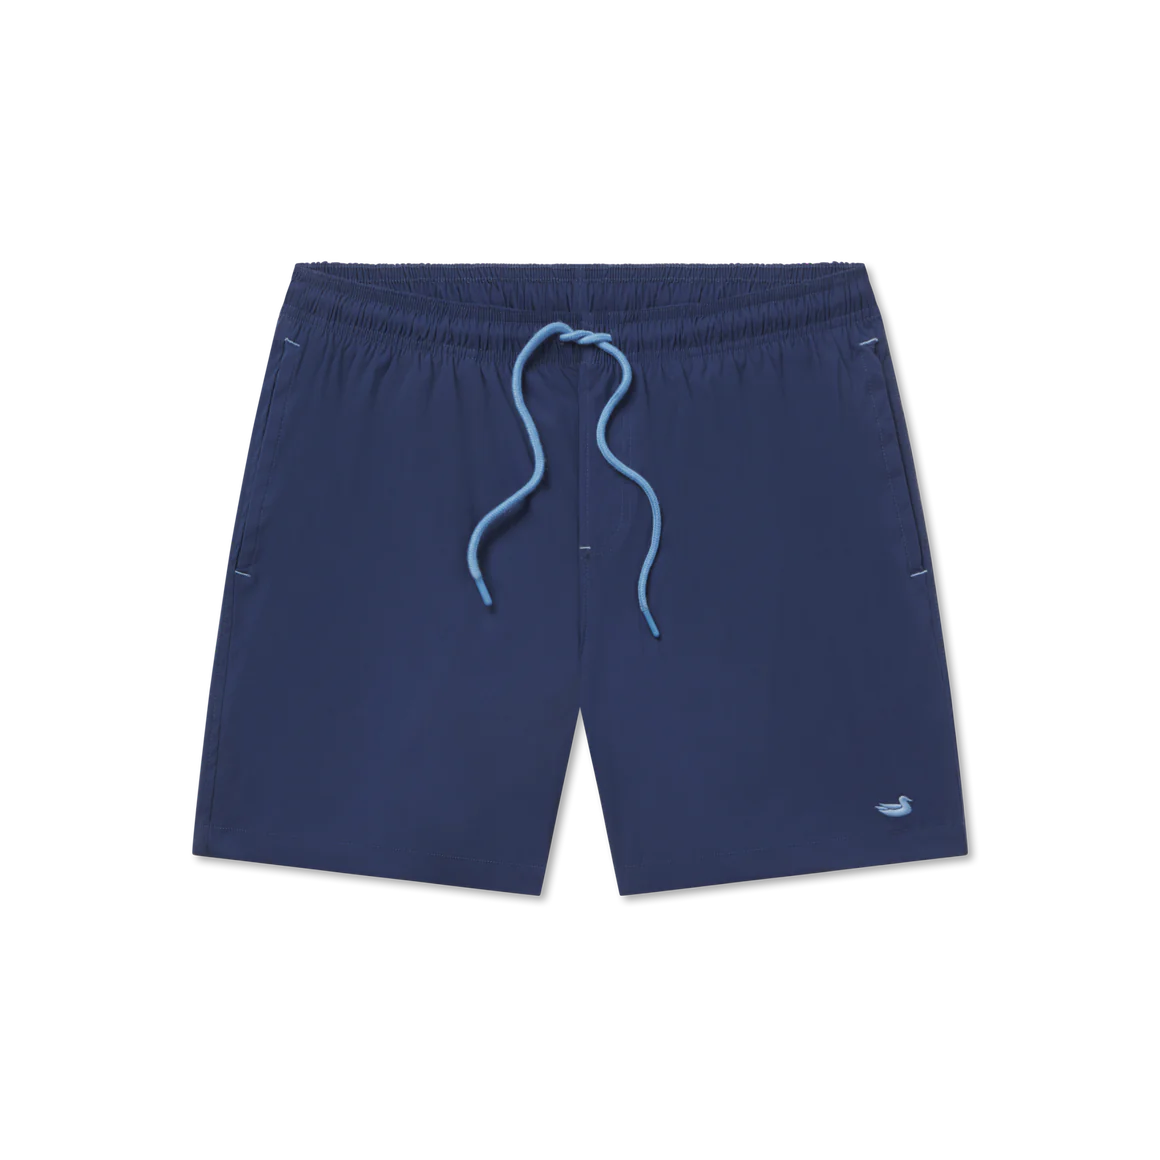 Southern Marsh Youth Wharf Stretch Lined Swim Trunk